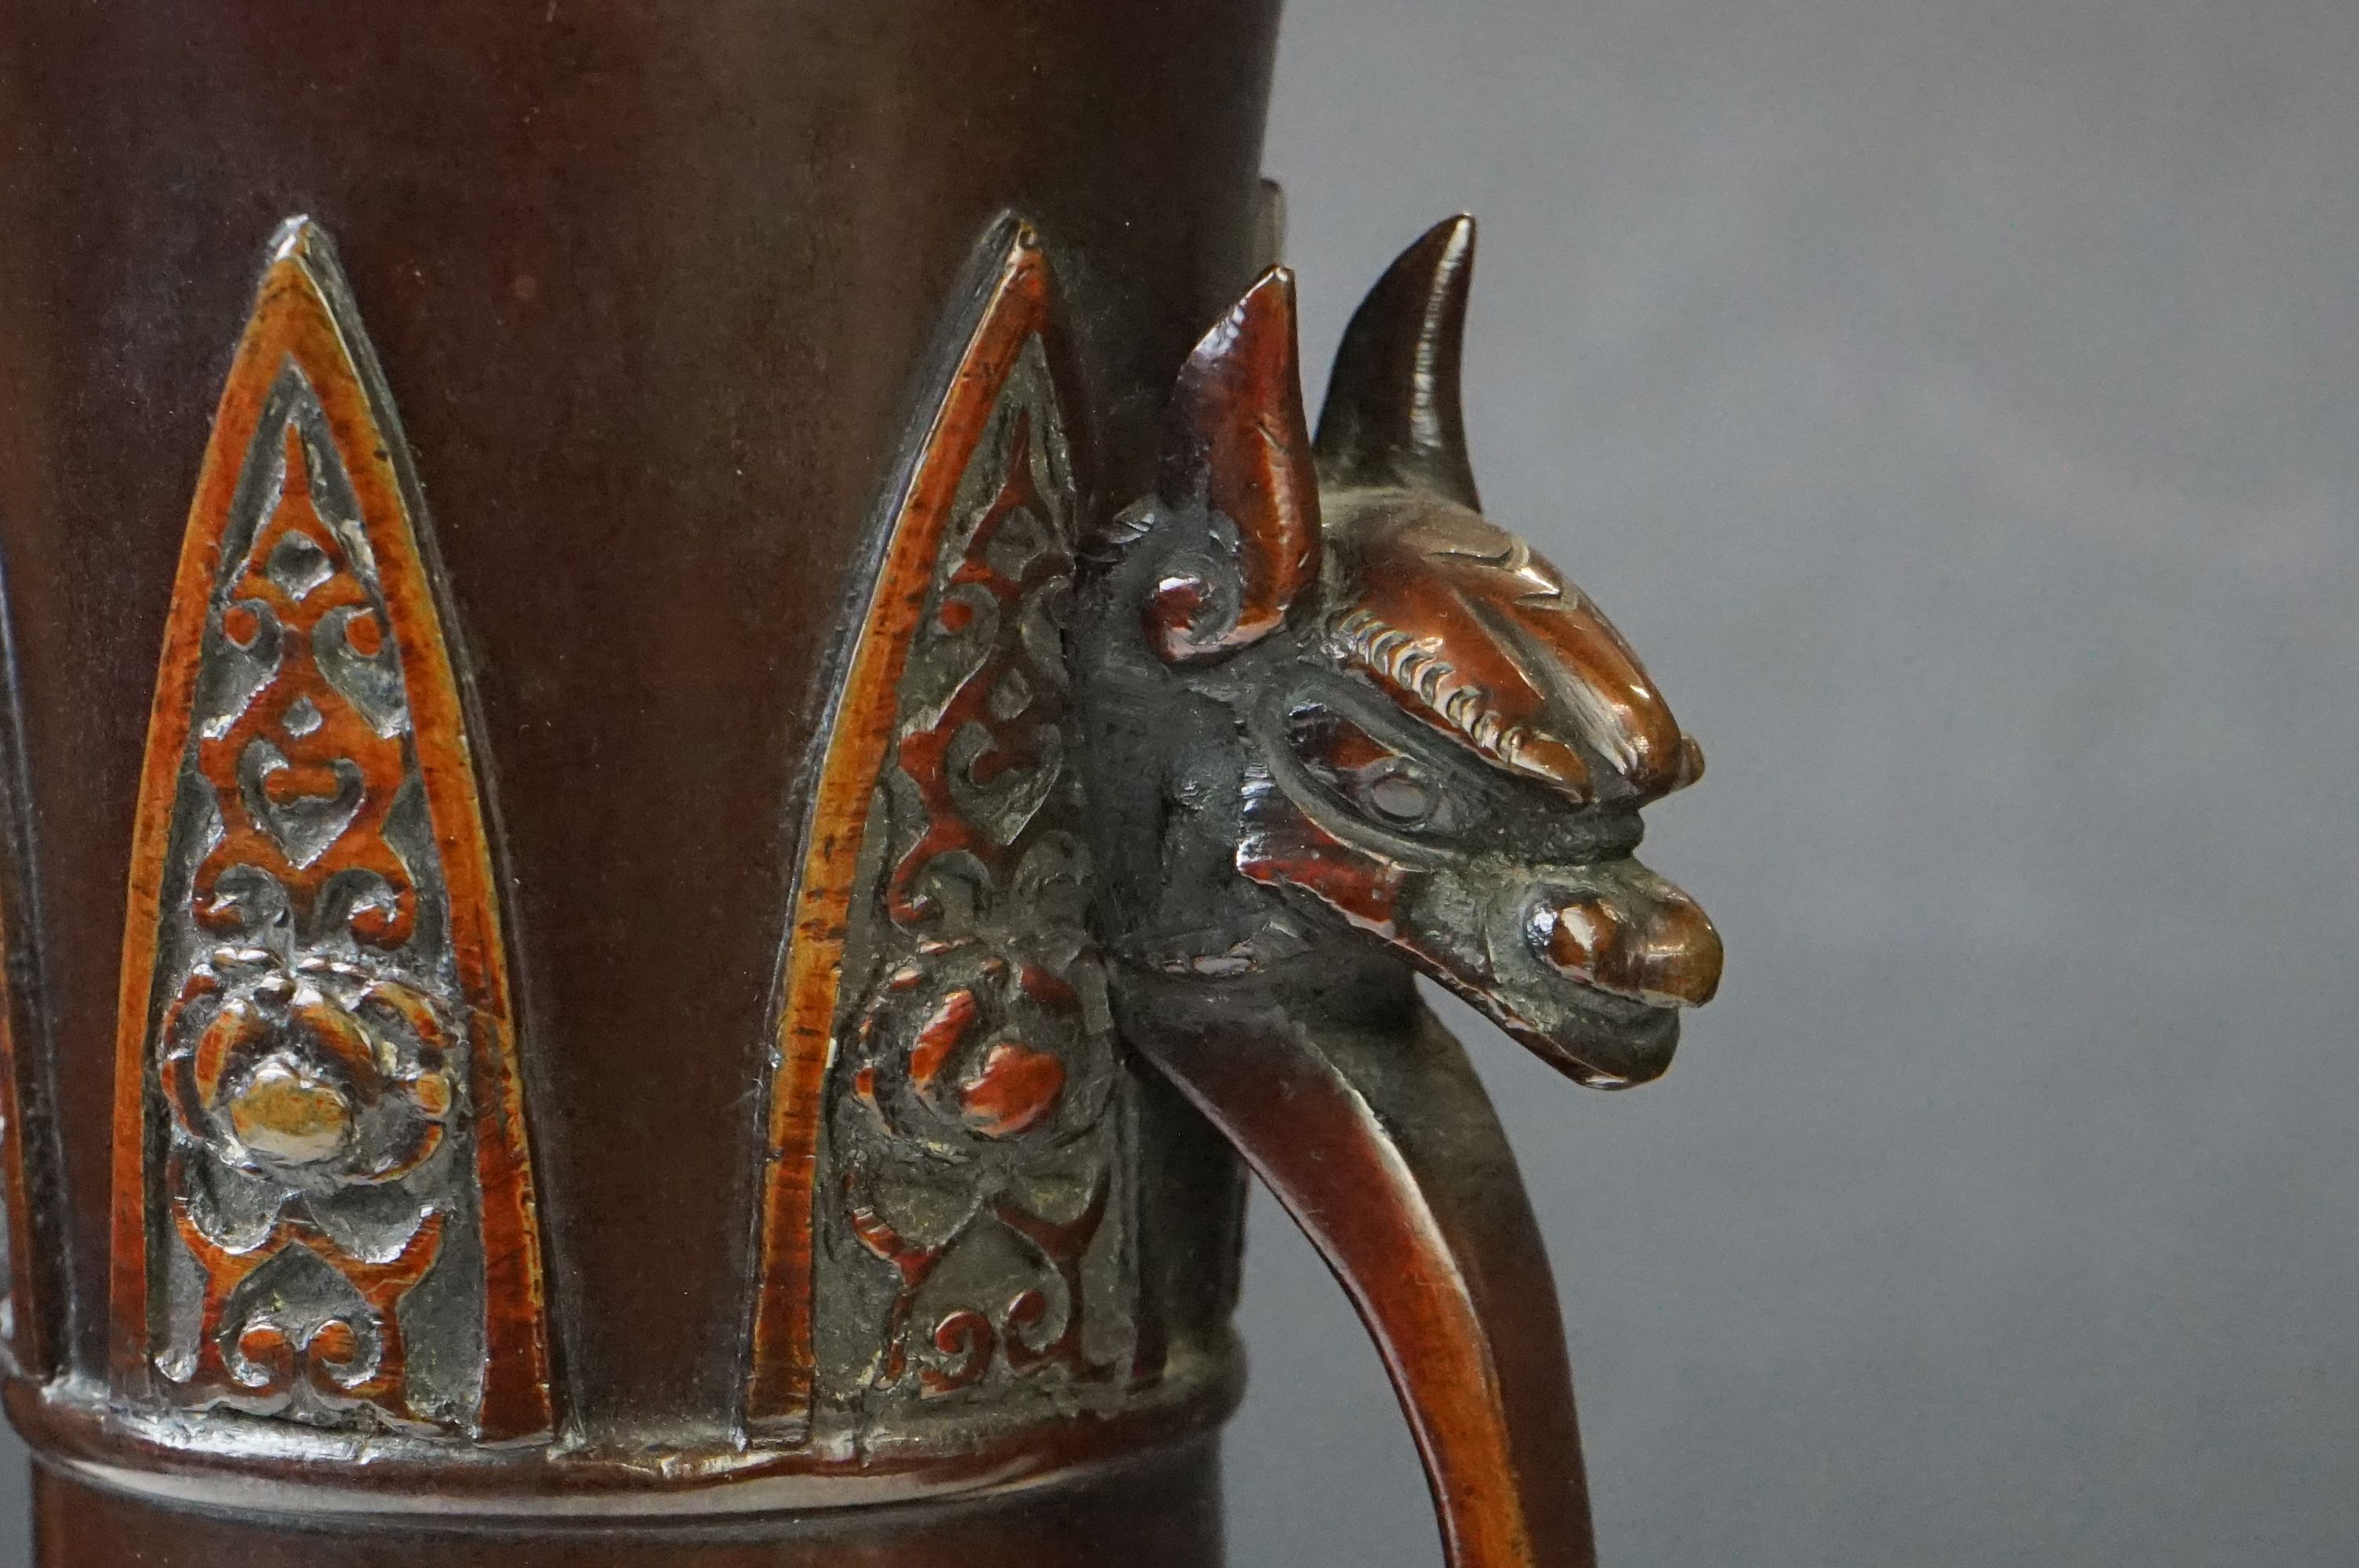 Near pair of Japanese bronze twin-handled bottle vases, with relief ornithological decoration and - Image 6 of 14